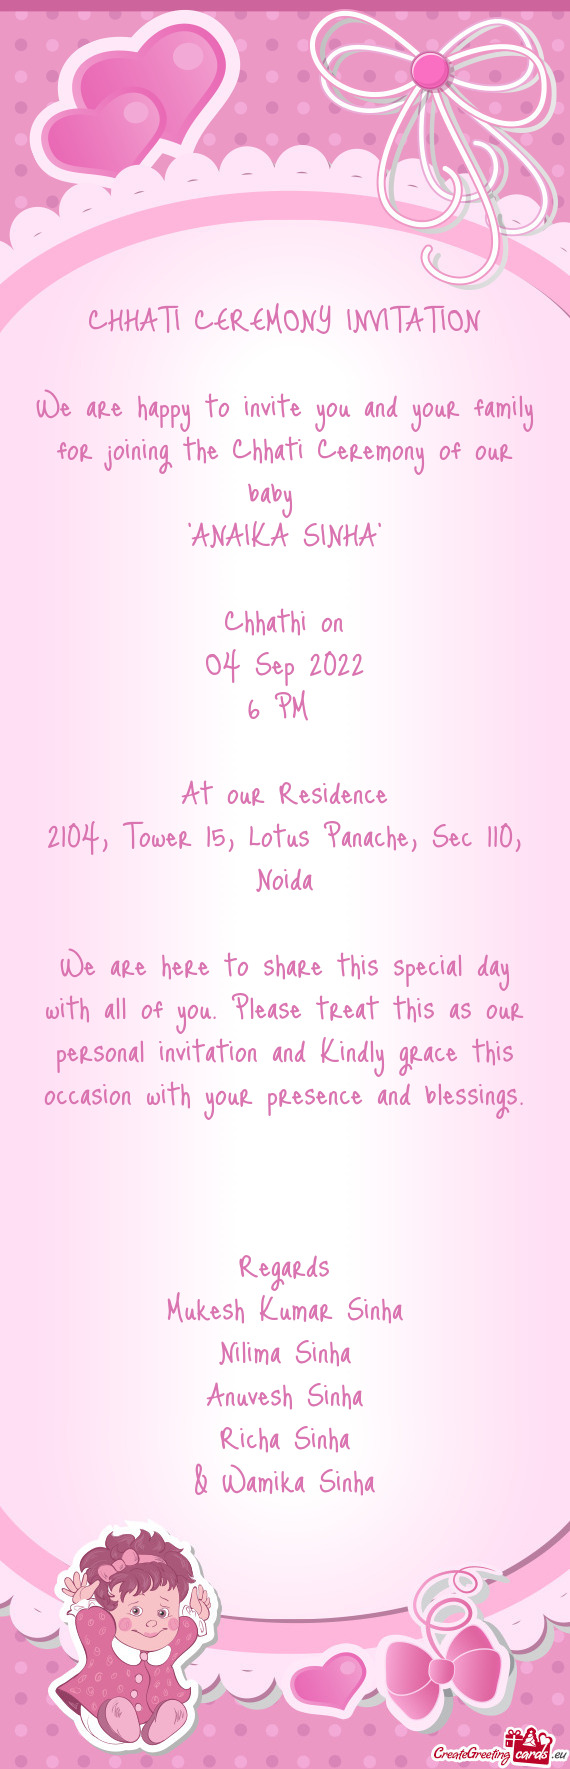 We are happy to invite you and your family for joining the Chhati Ceremony of our baby